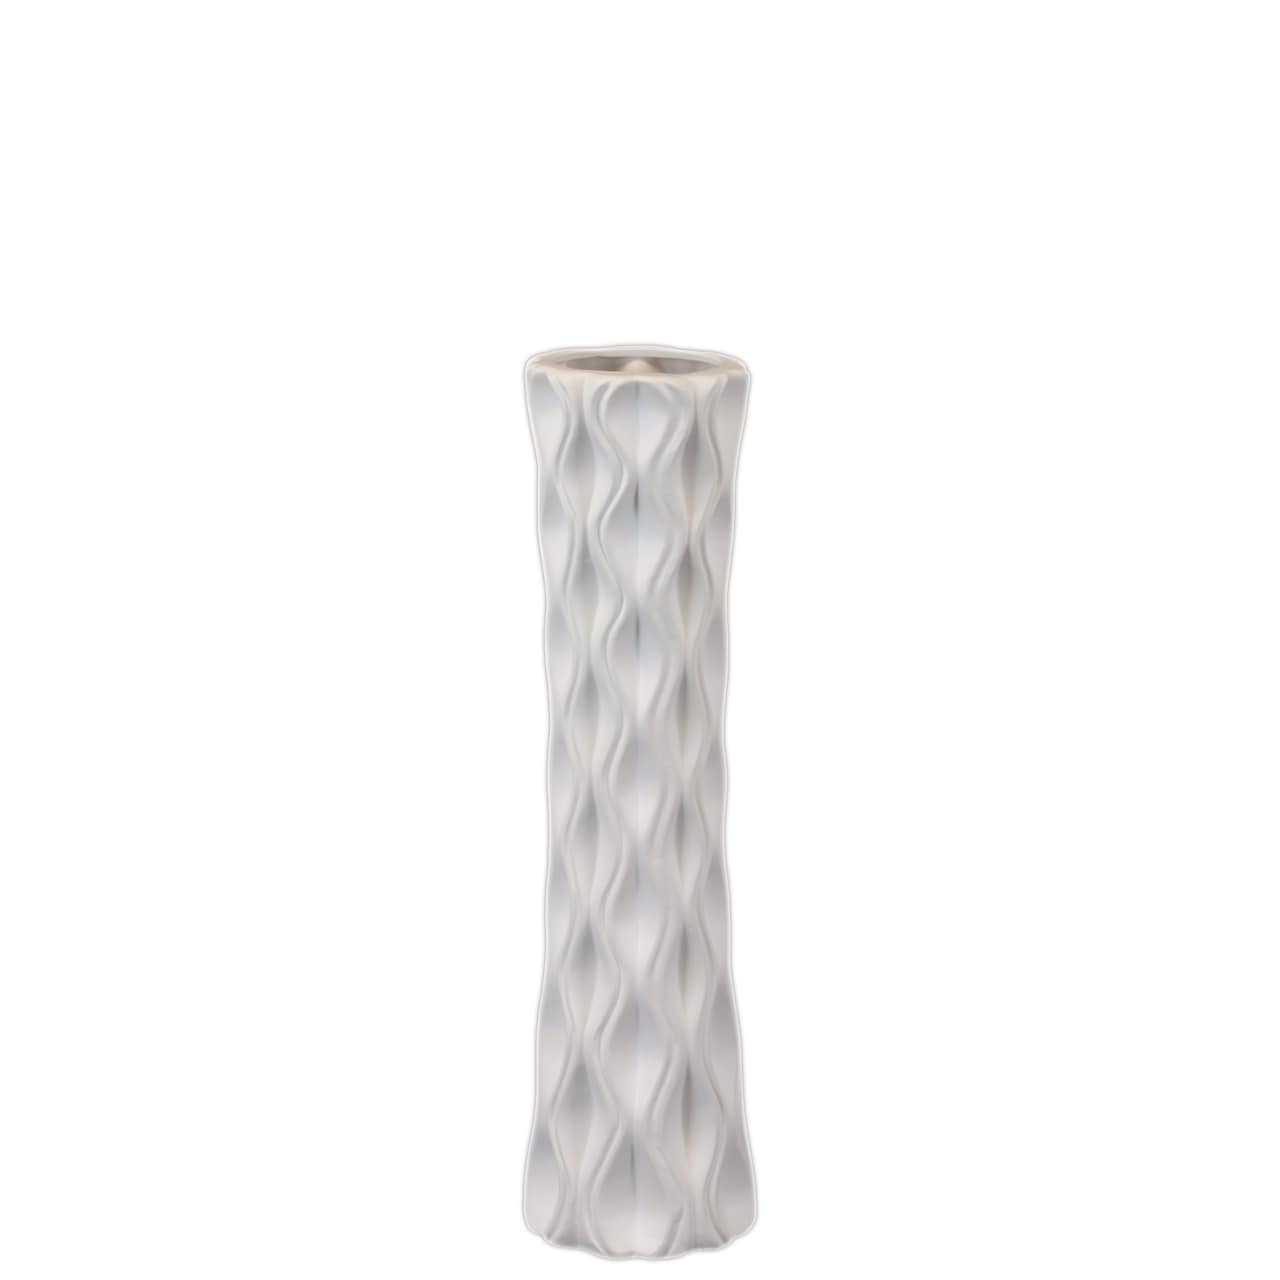 Ceramic White Vase (23 inches high x 6.5 inches wide x 6.5 inches deepUPC 877101201373For decorative purposes onlyDoes not hold water CeramicSize 23 inches high x 6.5 inches wide x 6.5 inches deepUPC 877101201373For decorative purposes onlyDoes not hol